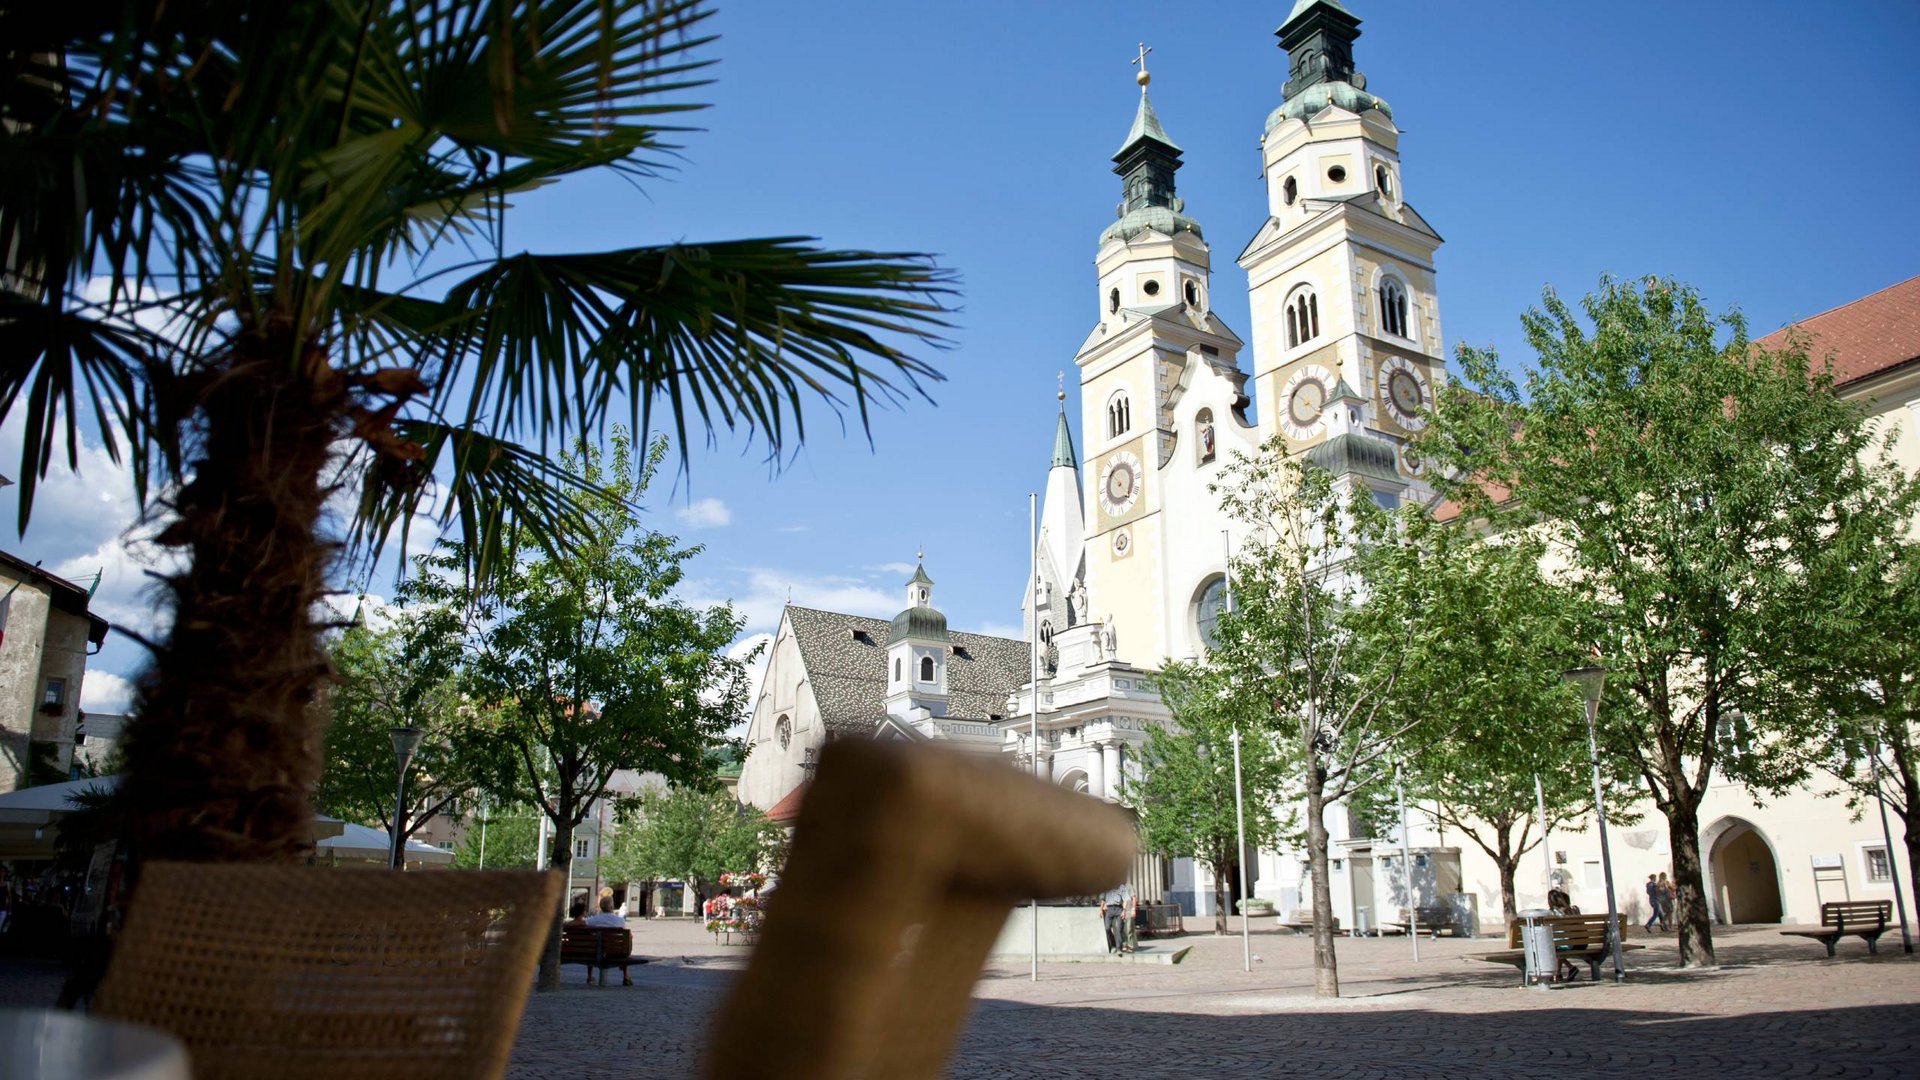 Tips for your holiday in Brixen